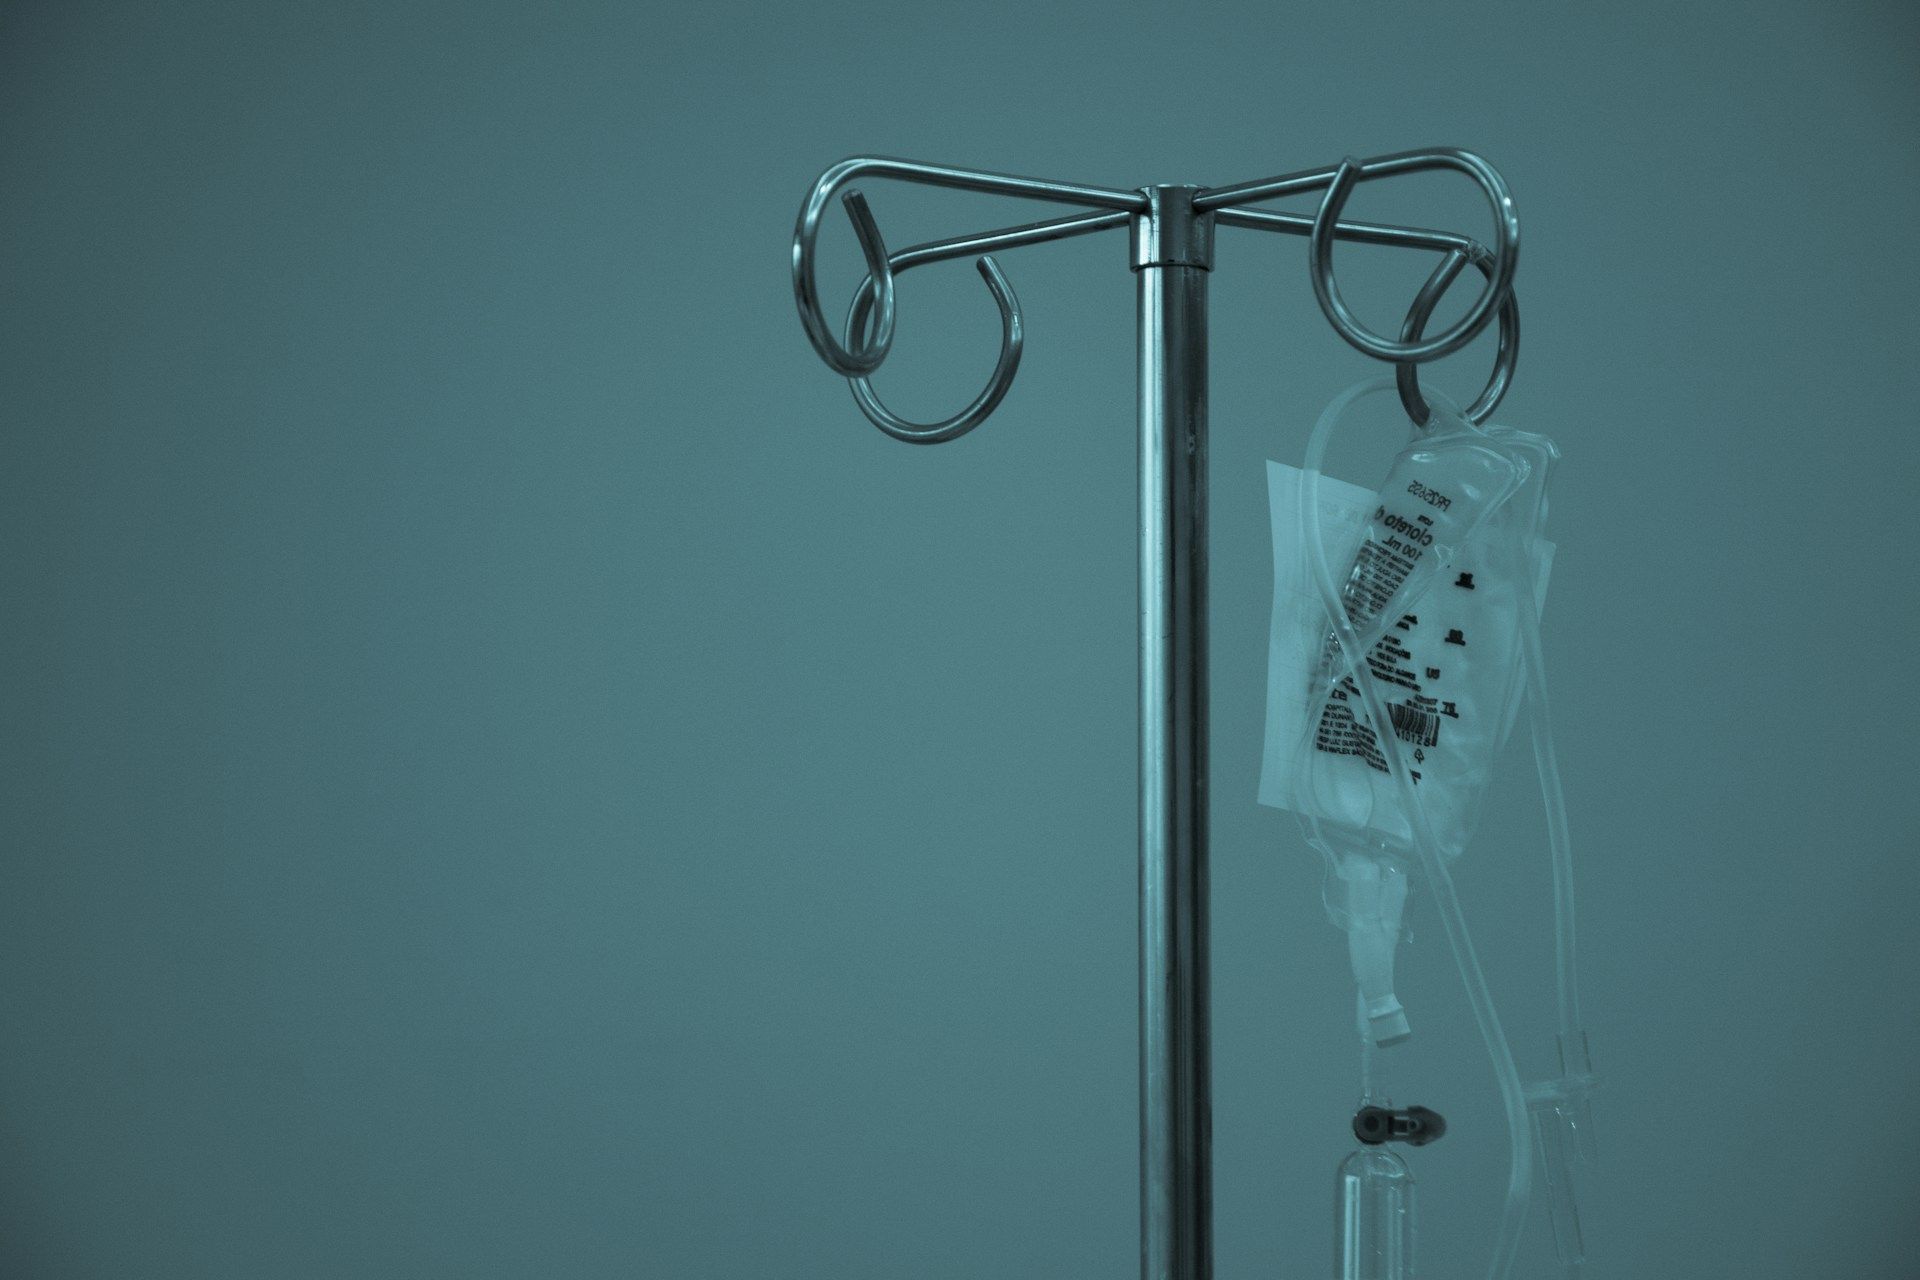 An IV (intravenous) drip bag hanging from a metal stand